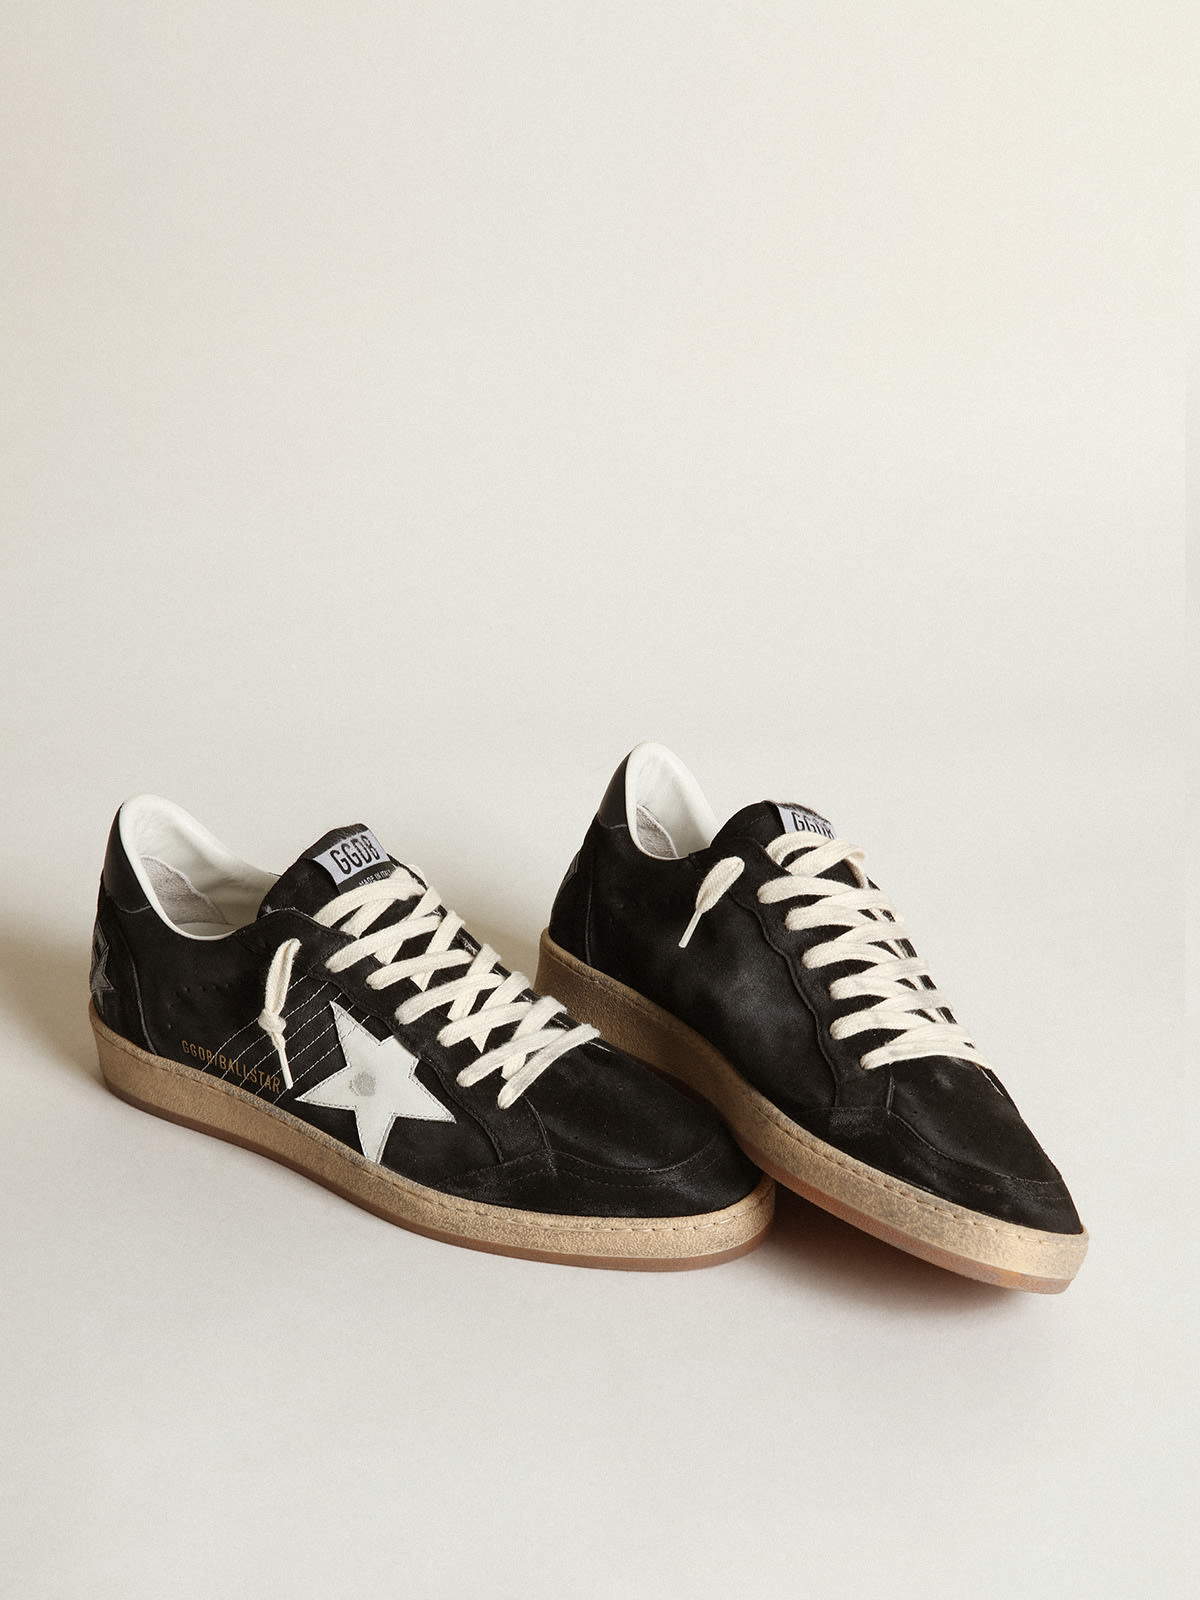 Golden Goose - Men's Ball Star in black suede with white leather star in 